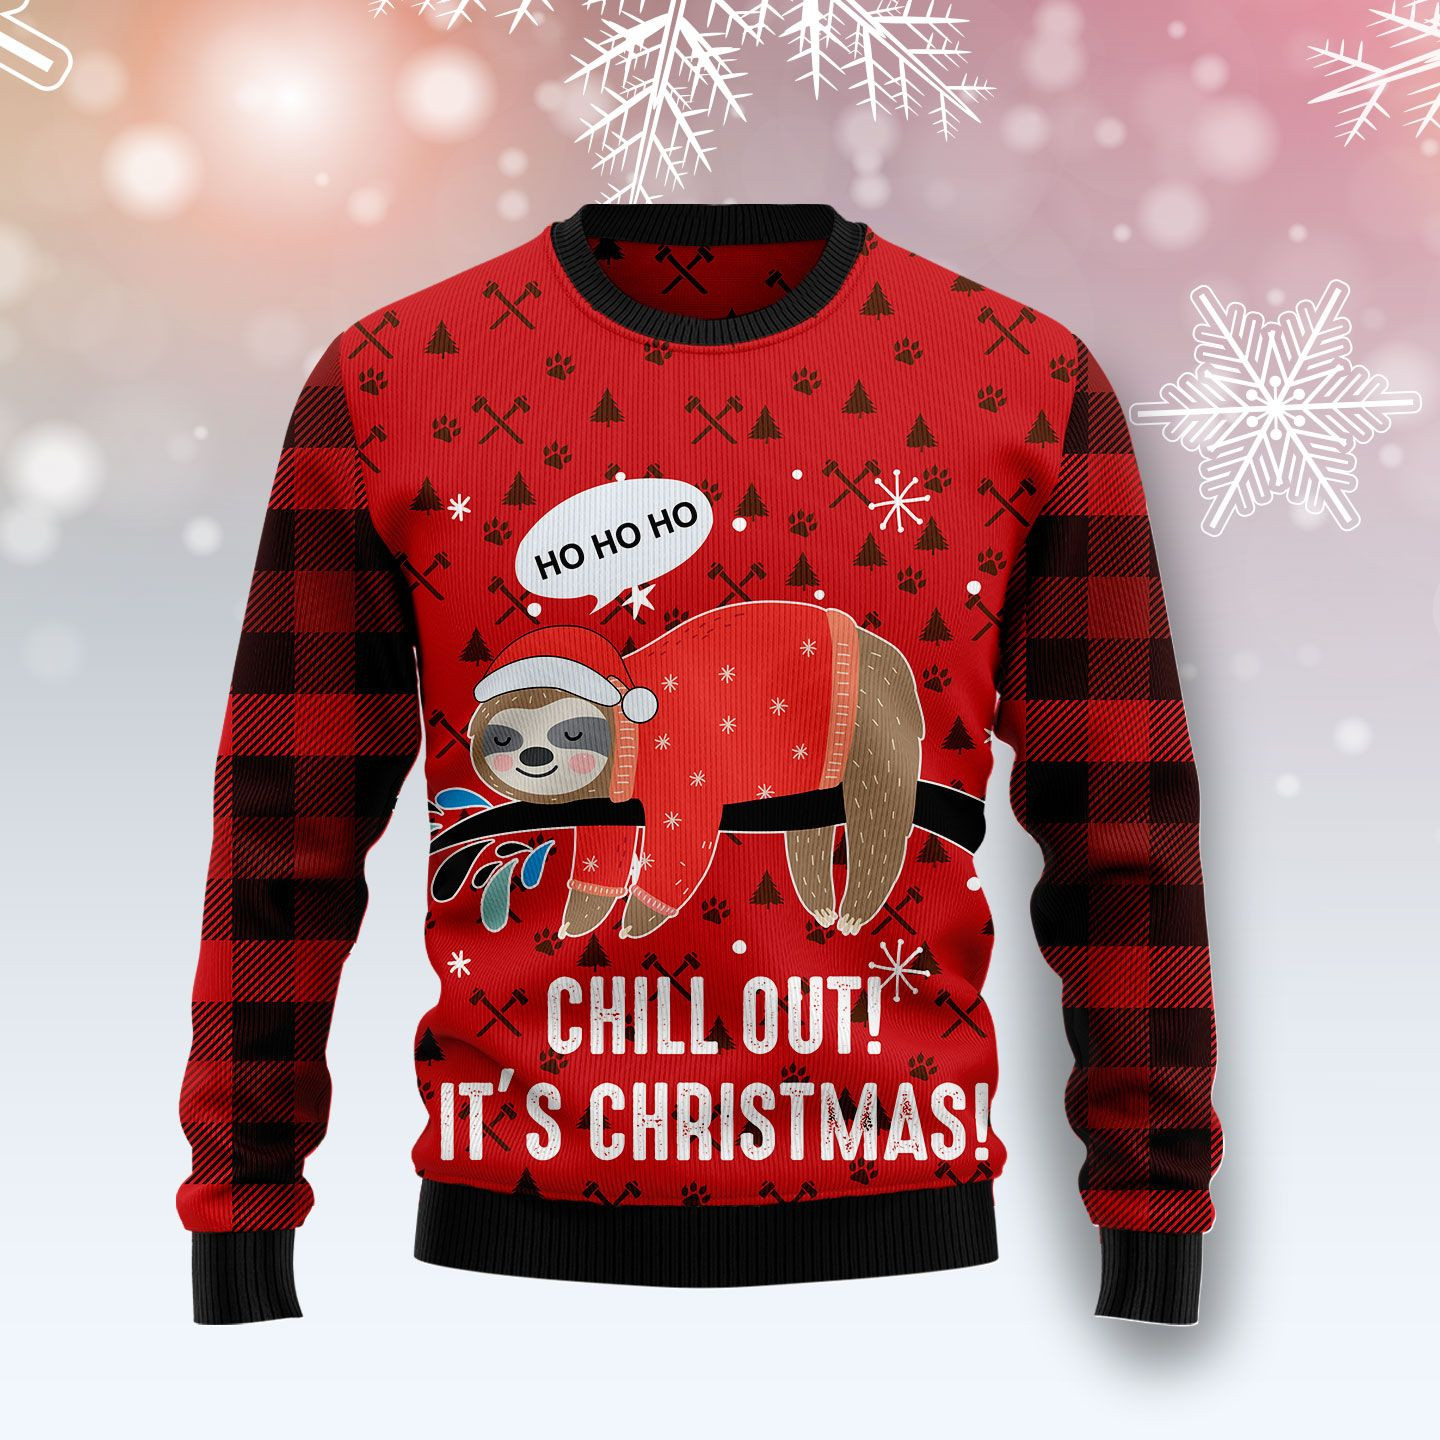 Sloth Chill Out Ugly Christmas Sweater Ugly Sweater For Men Women